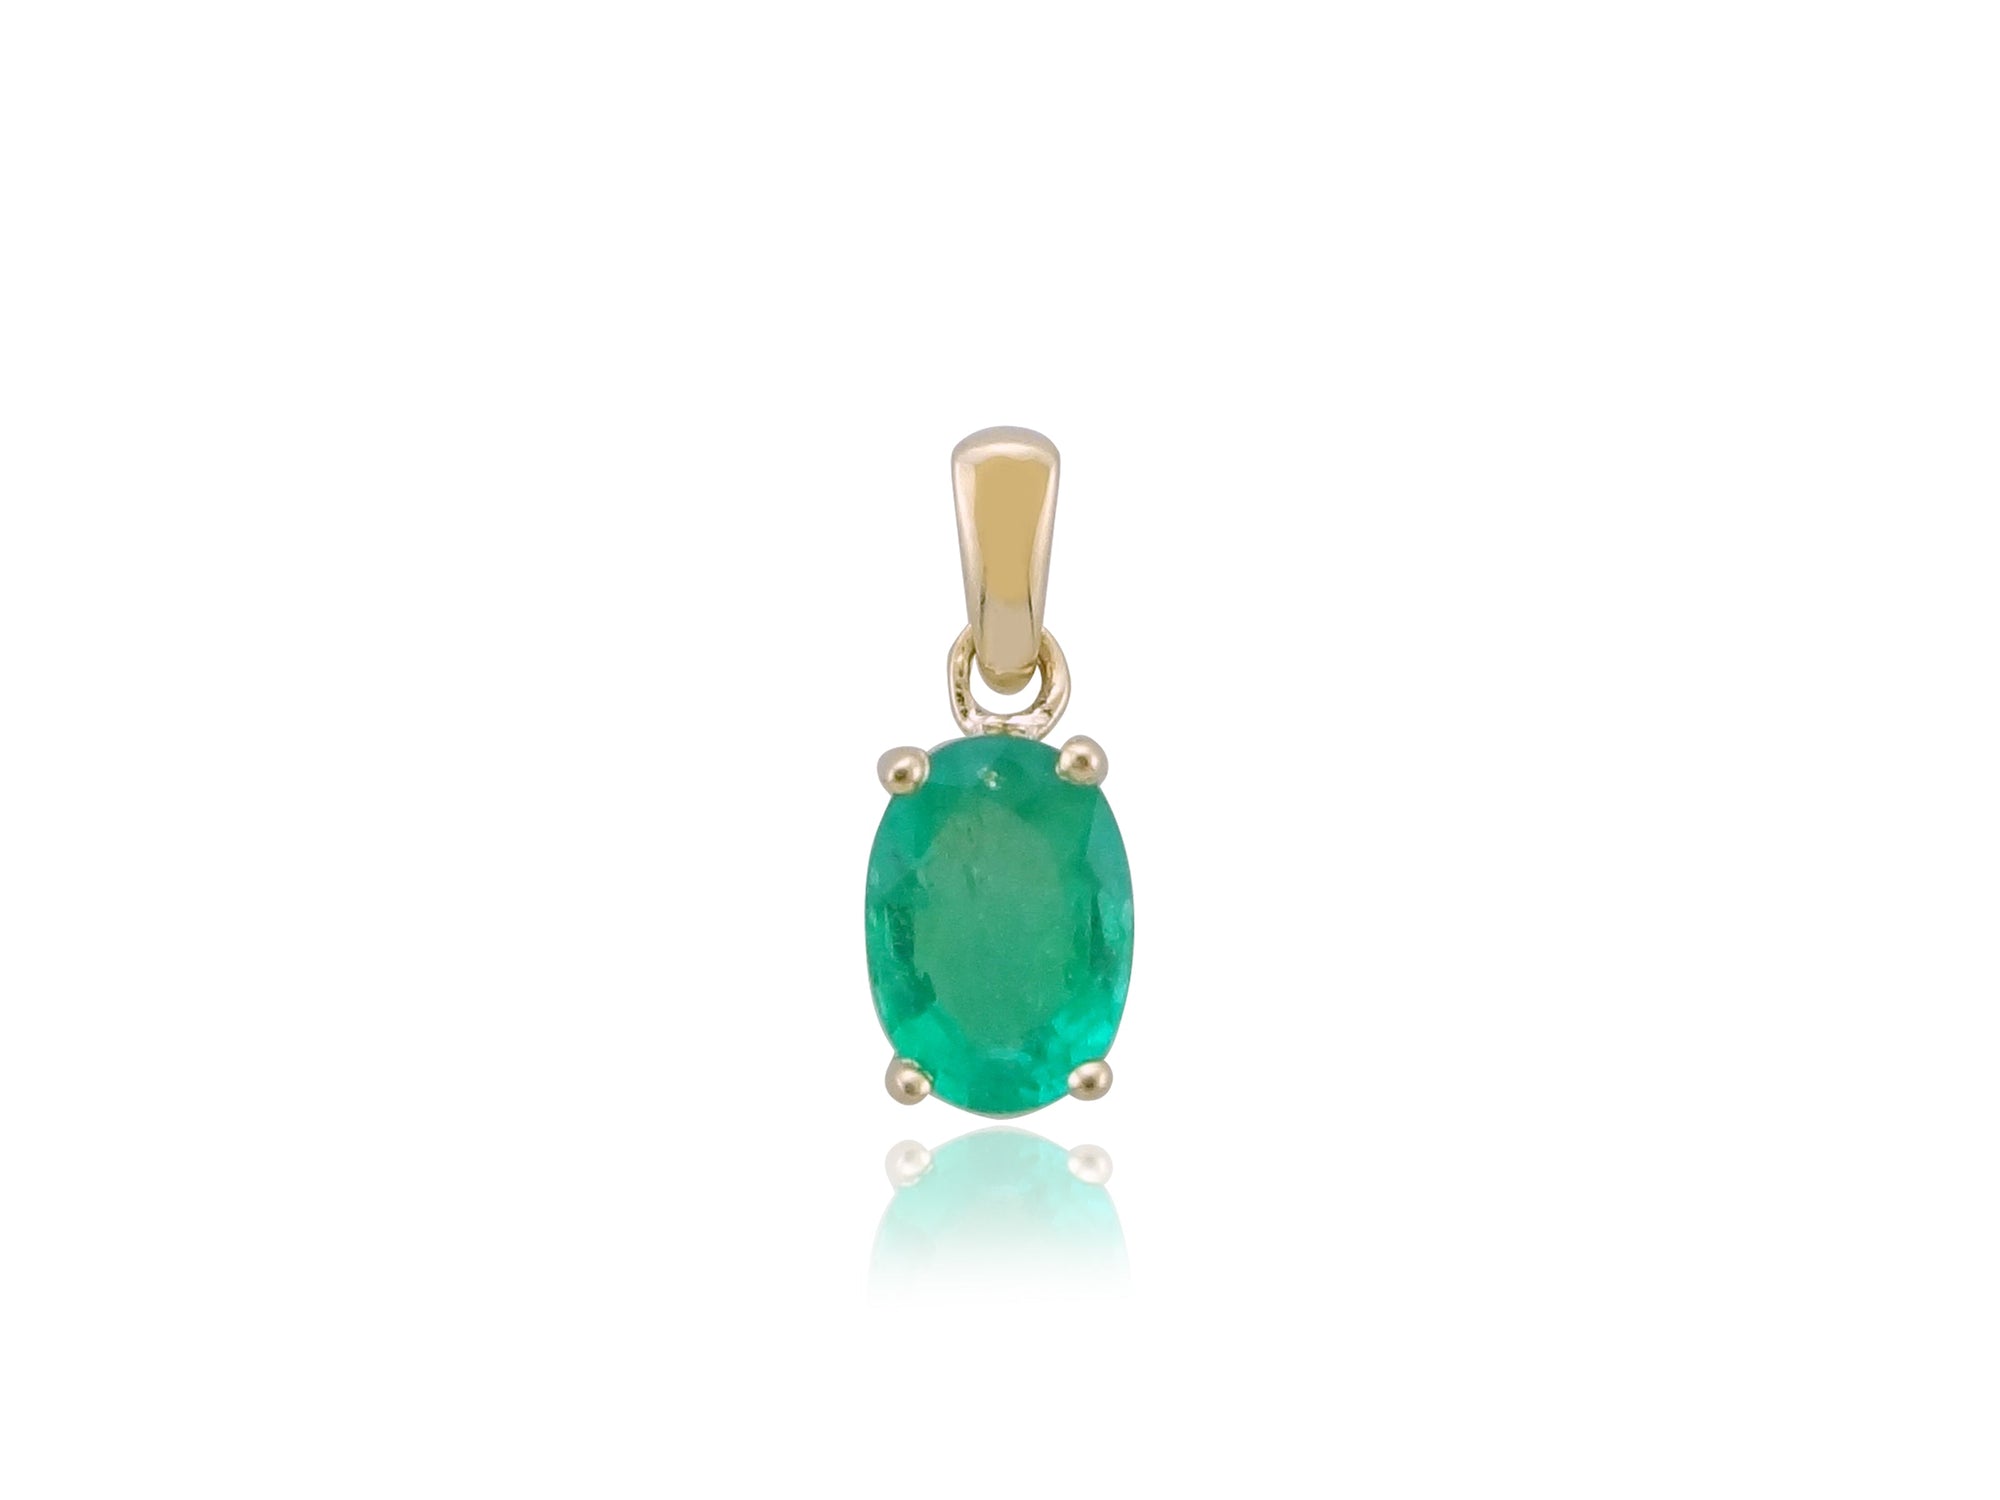 9ct gold 7x5mm oval emerald pendant